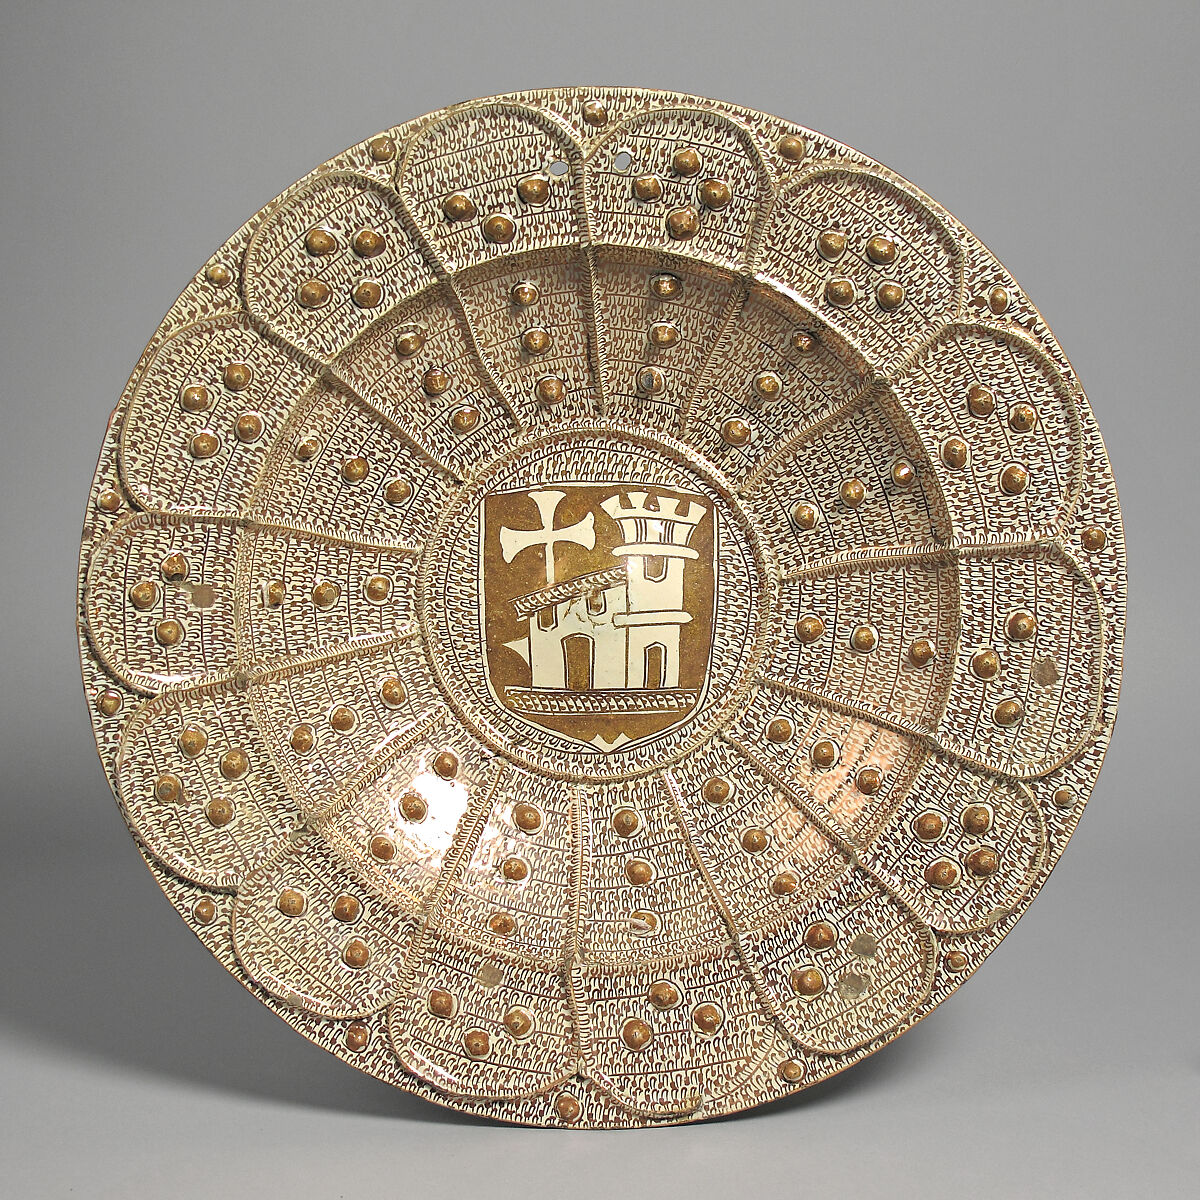 Dish with Unidentified Coat of Arms, Tin-glazed earthenware, Spanish 